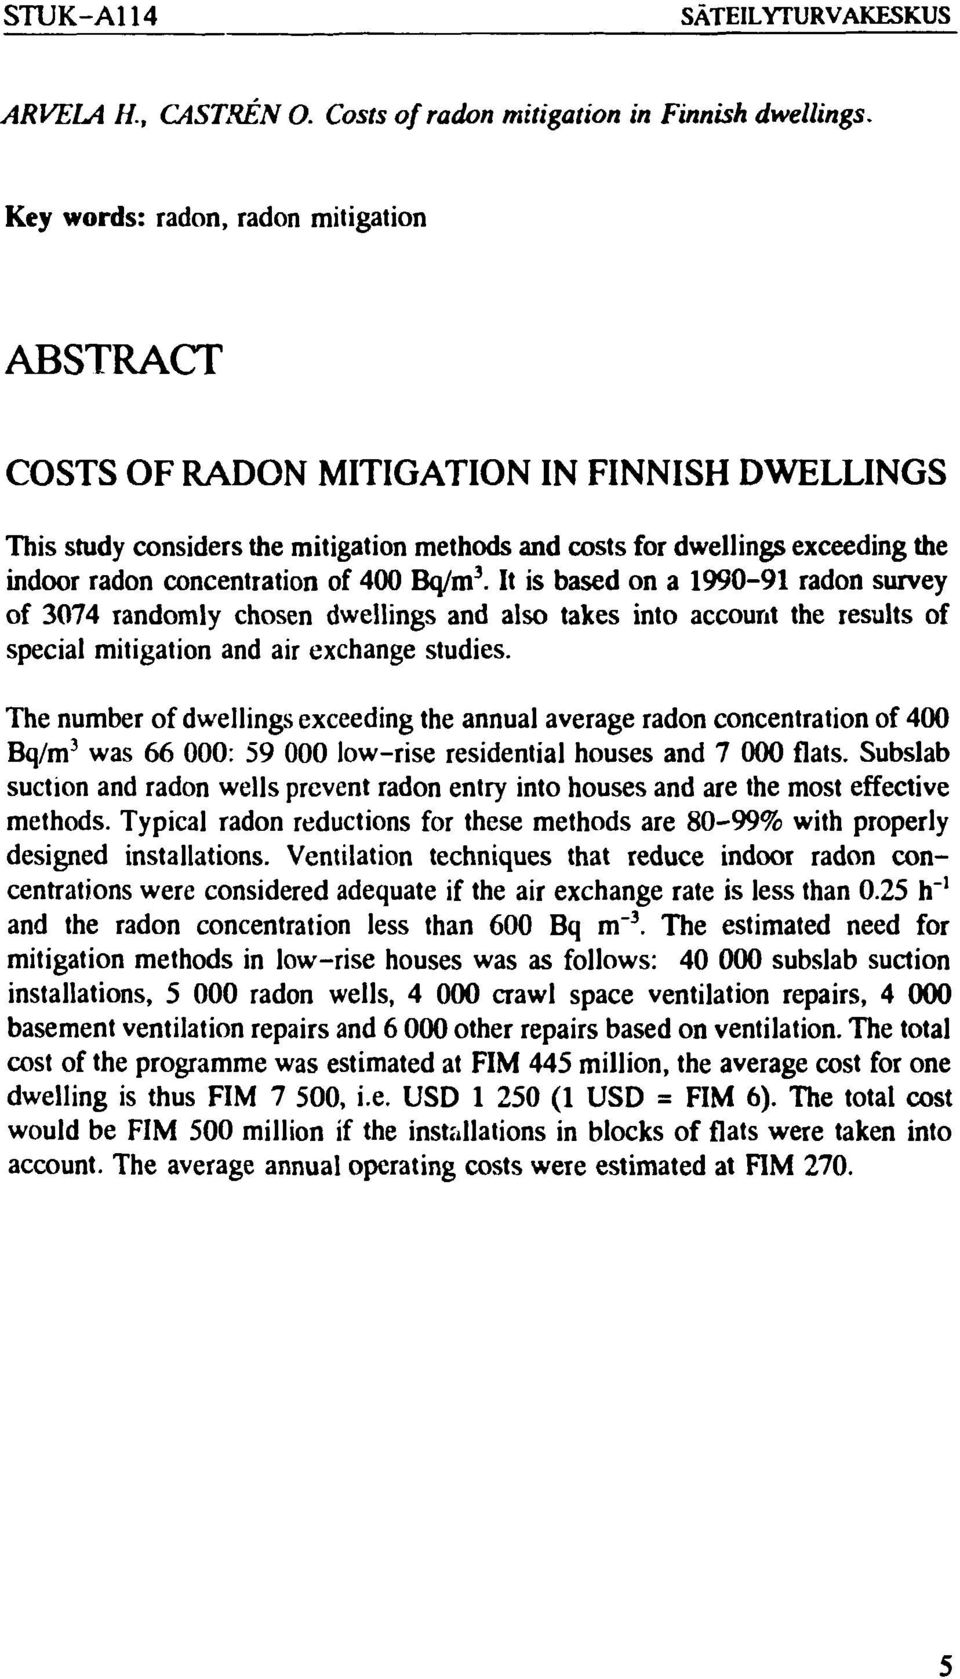 of 400 Bq/m 3. It is based on a 1990-91 radon survey of 3074 randomly chosen dwellings and also takes into account the results of special mitigation and air exchange studies.